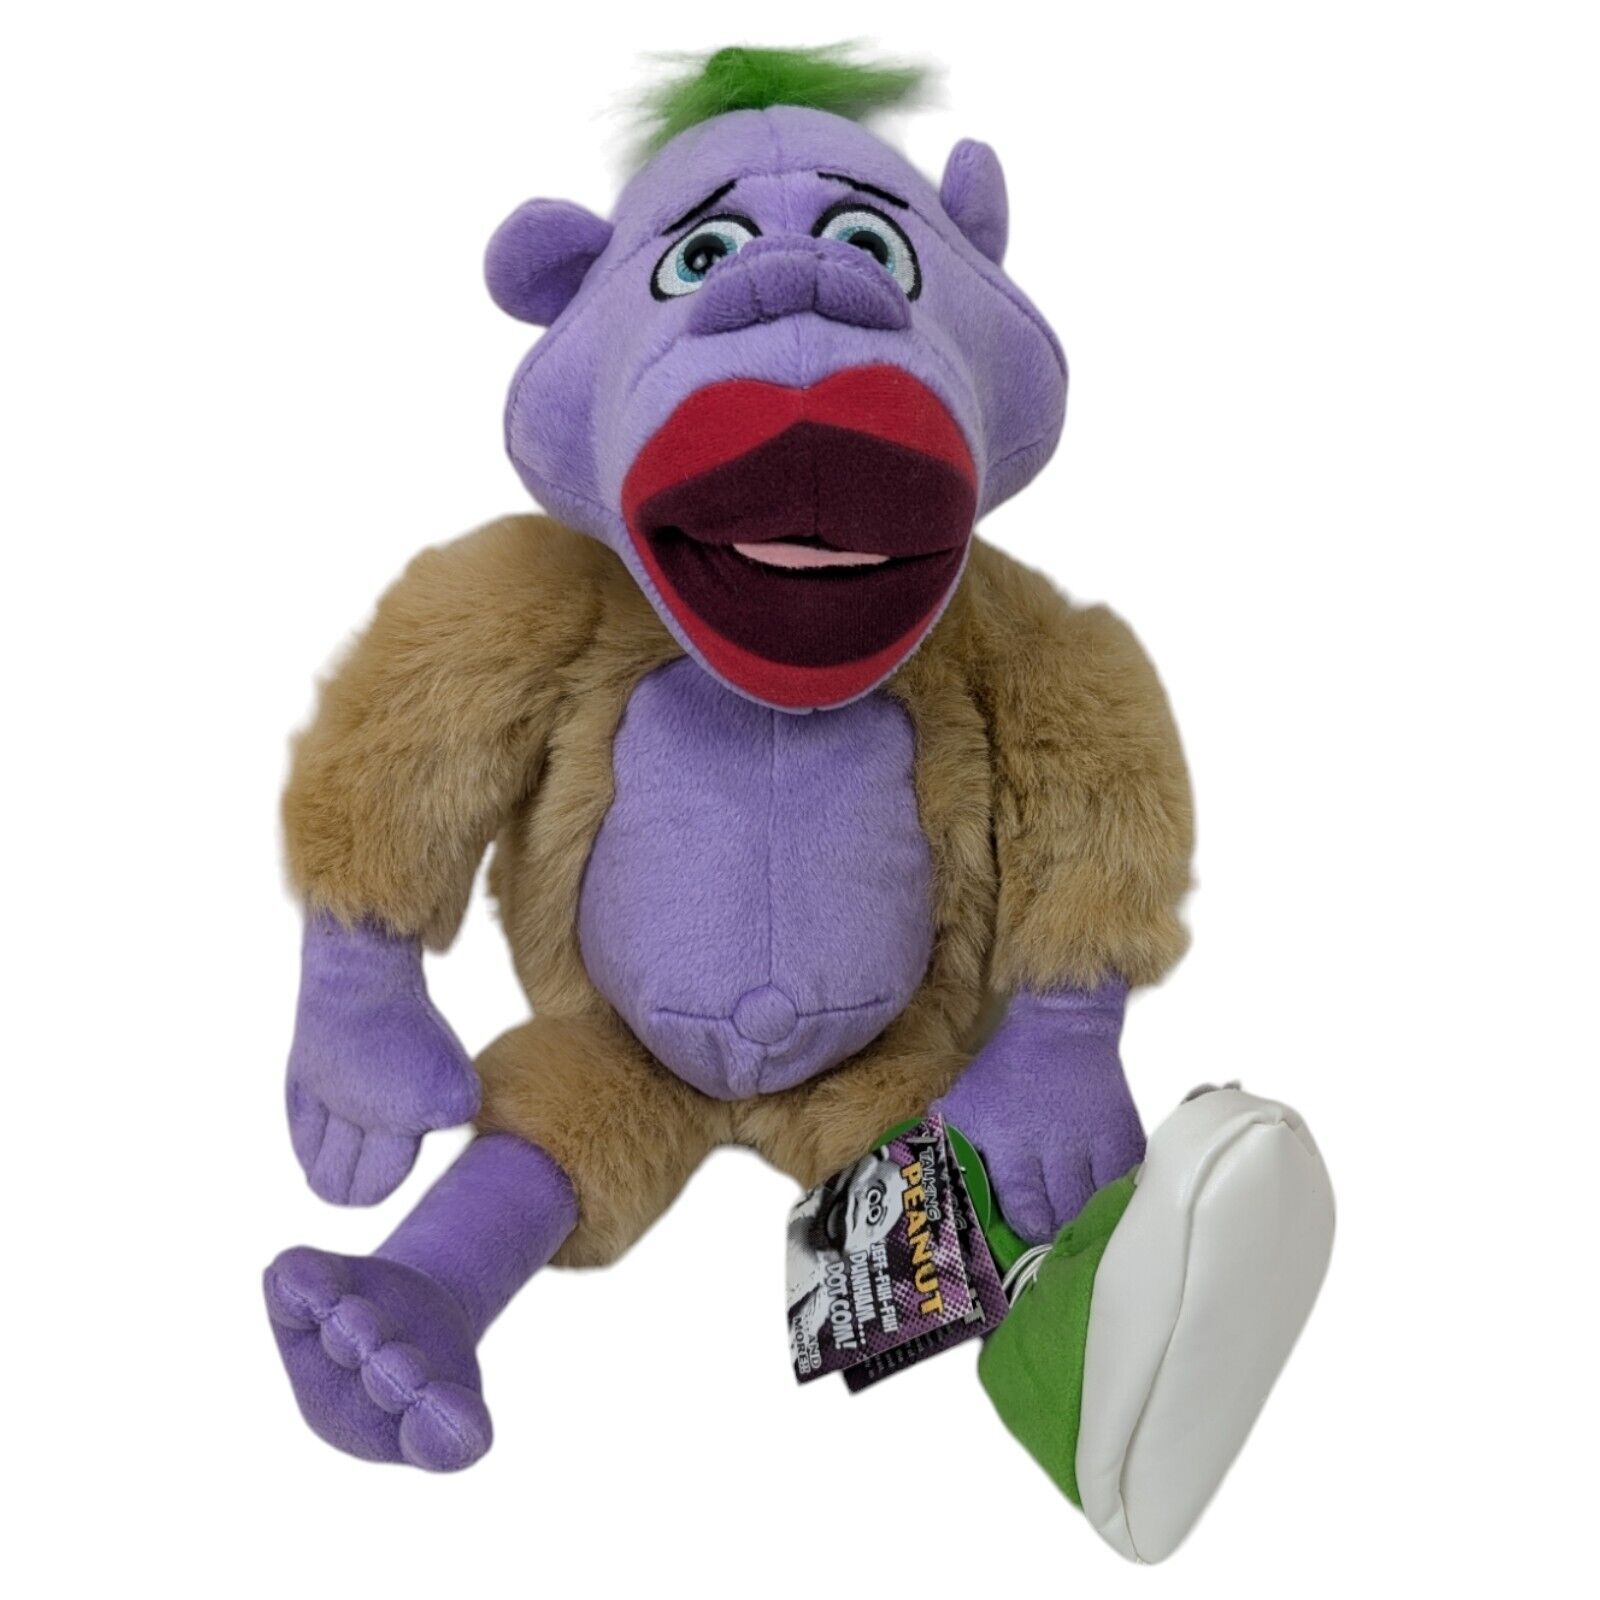 Jeff Dunham Show 2009 Talking Peanut Plush 17” with Tags Puppet Works Tested